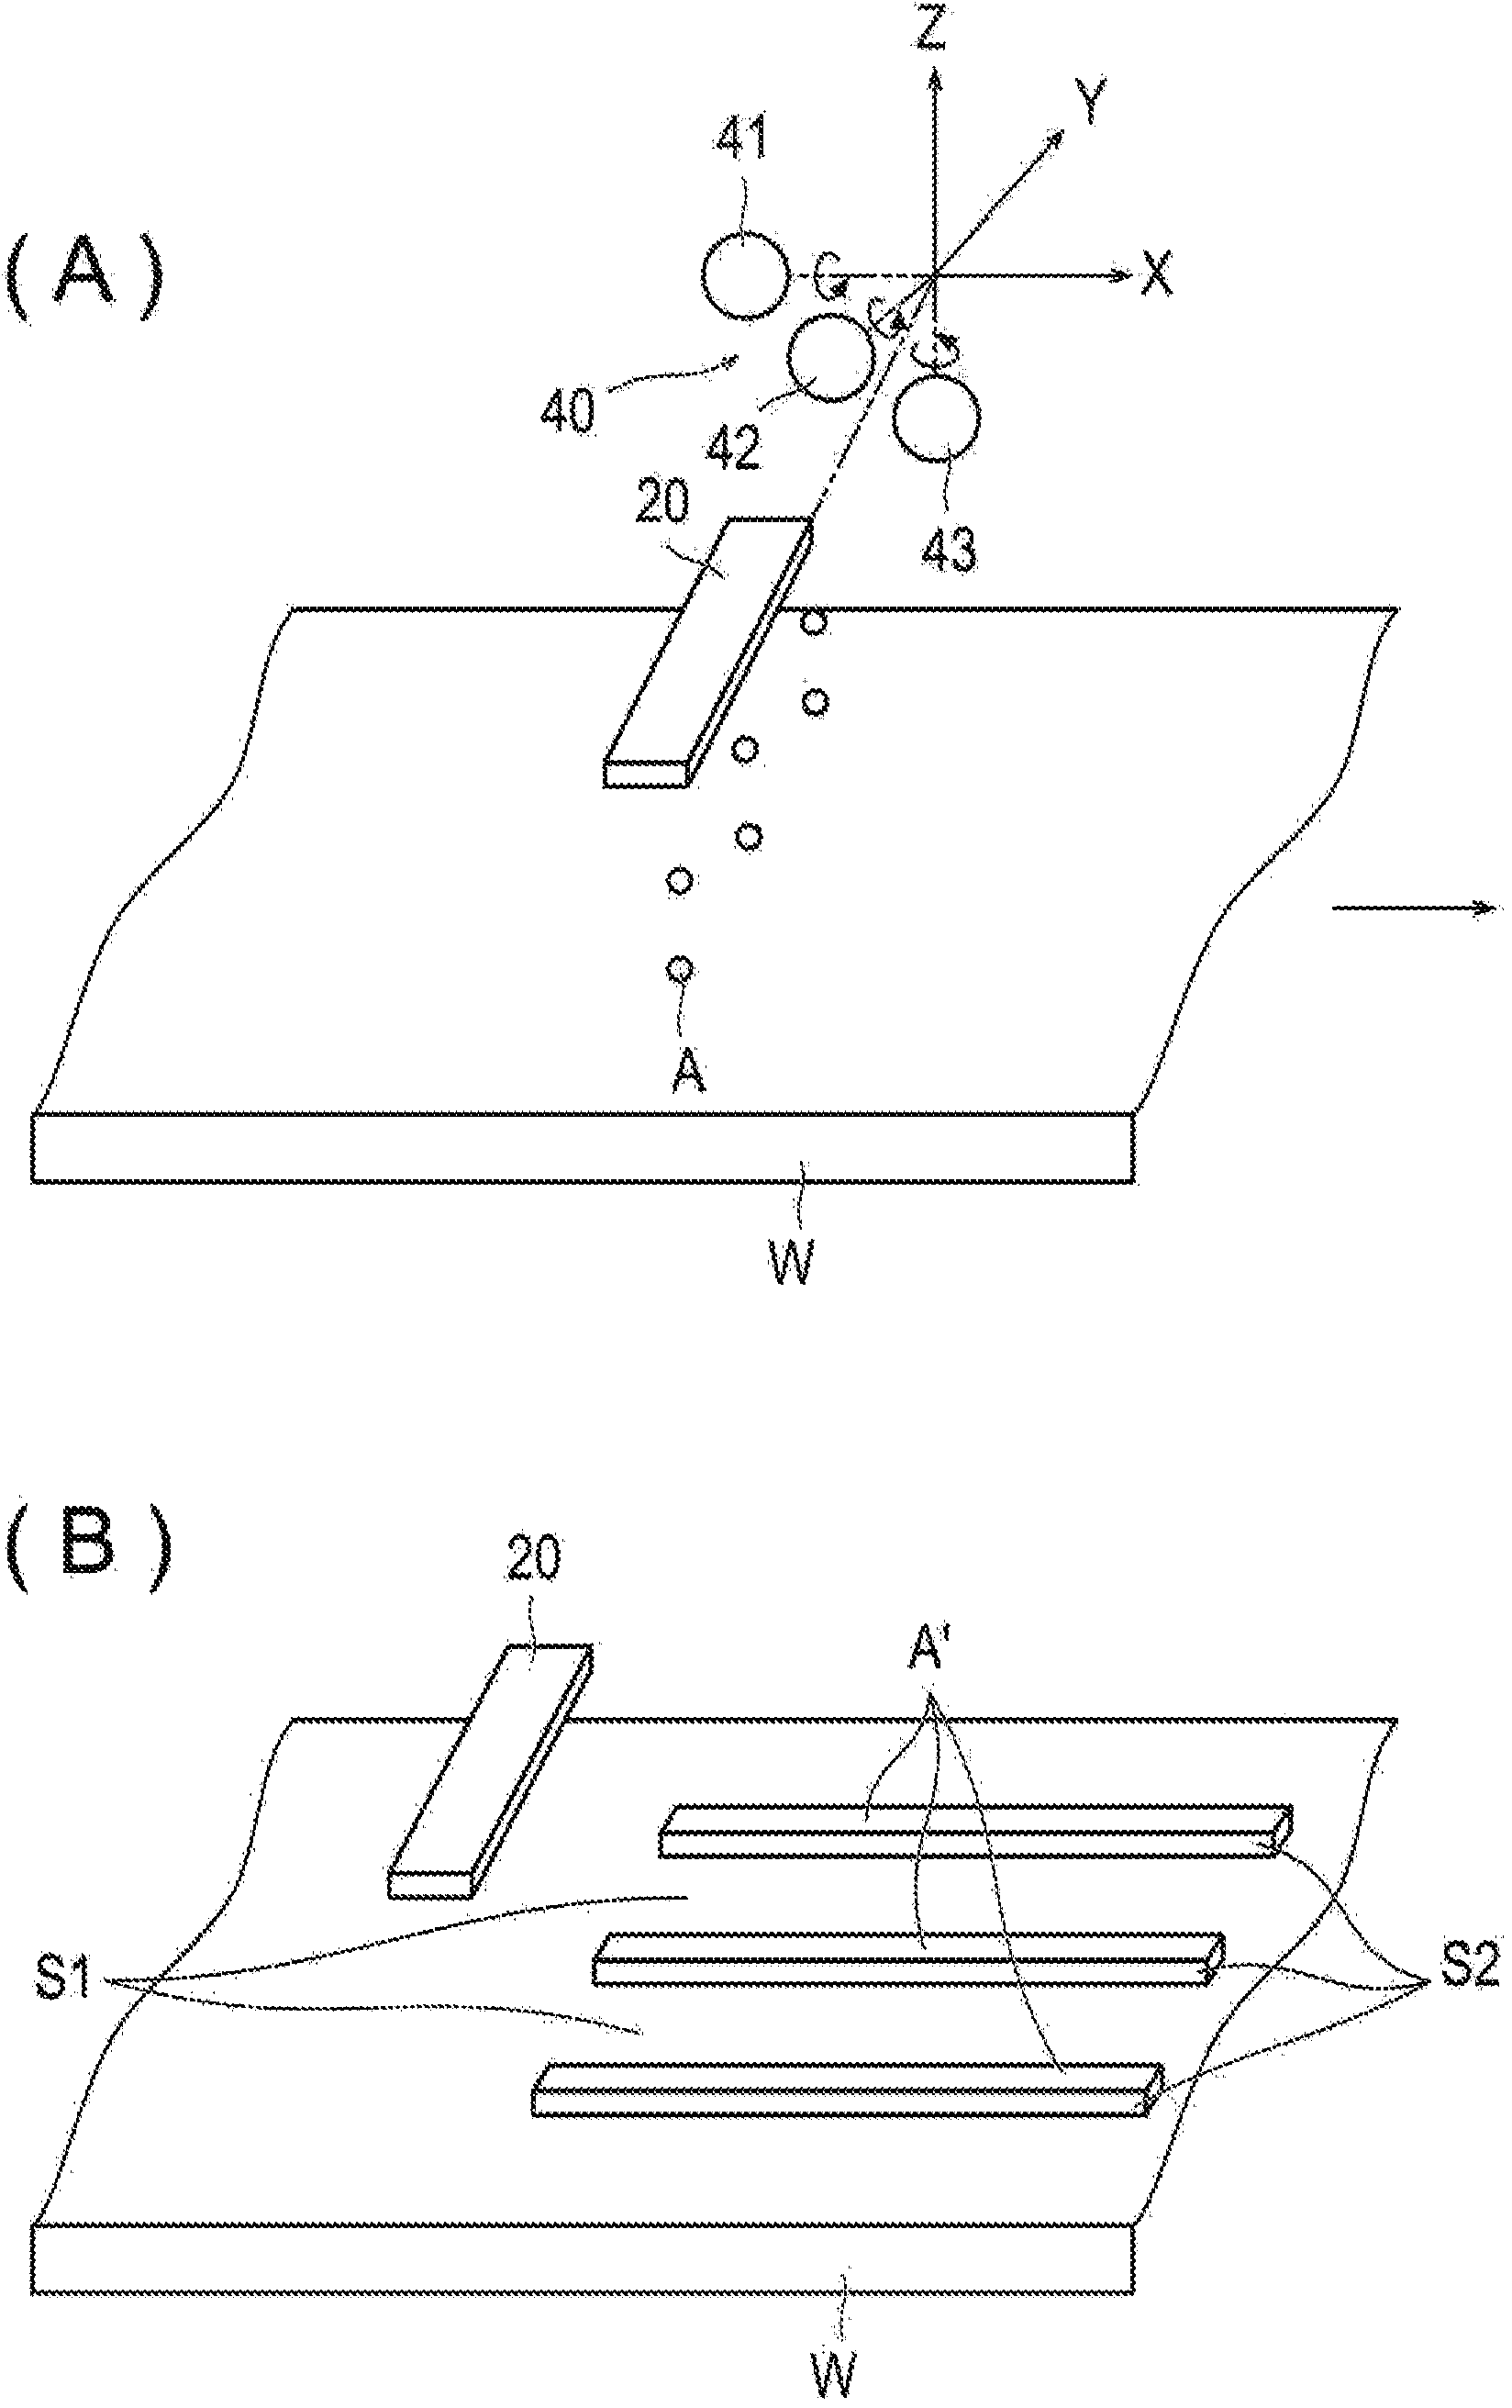 Application device, removal device, application and removal system as well as application method, removal method, and application and removal method